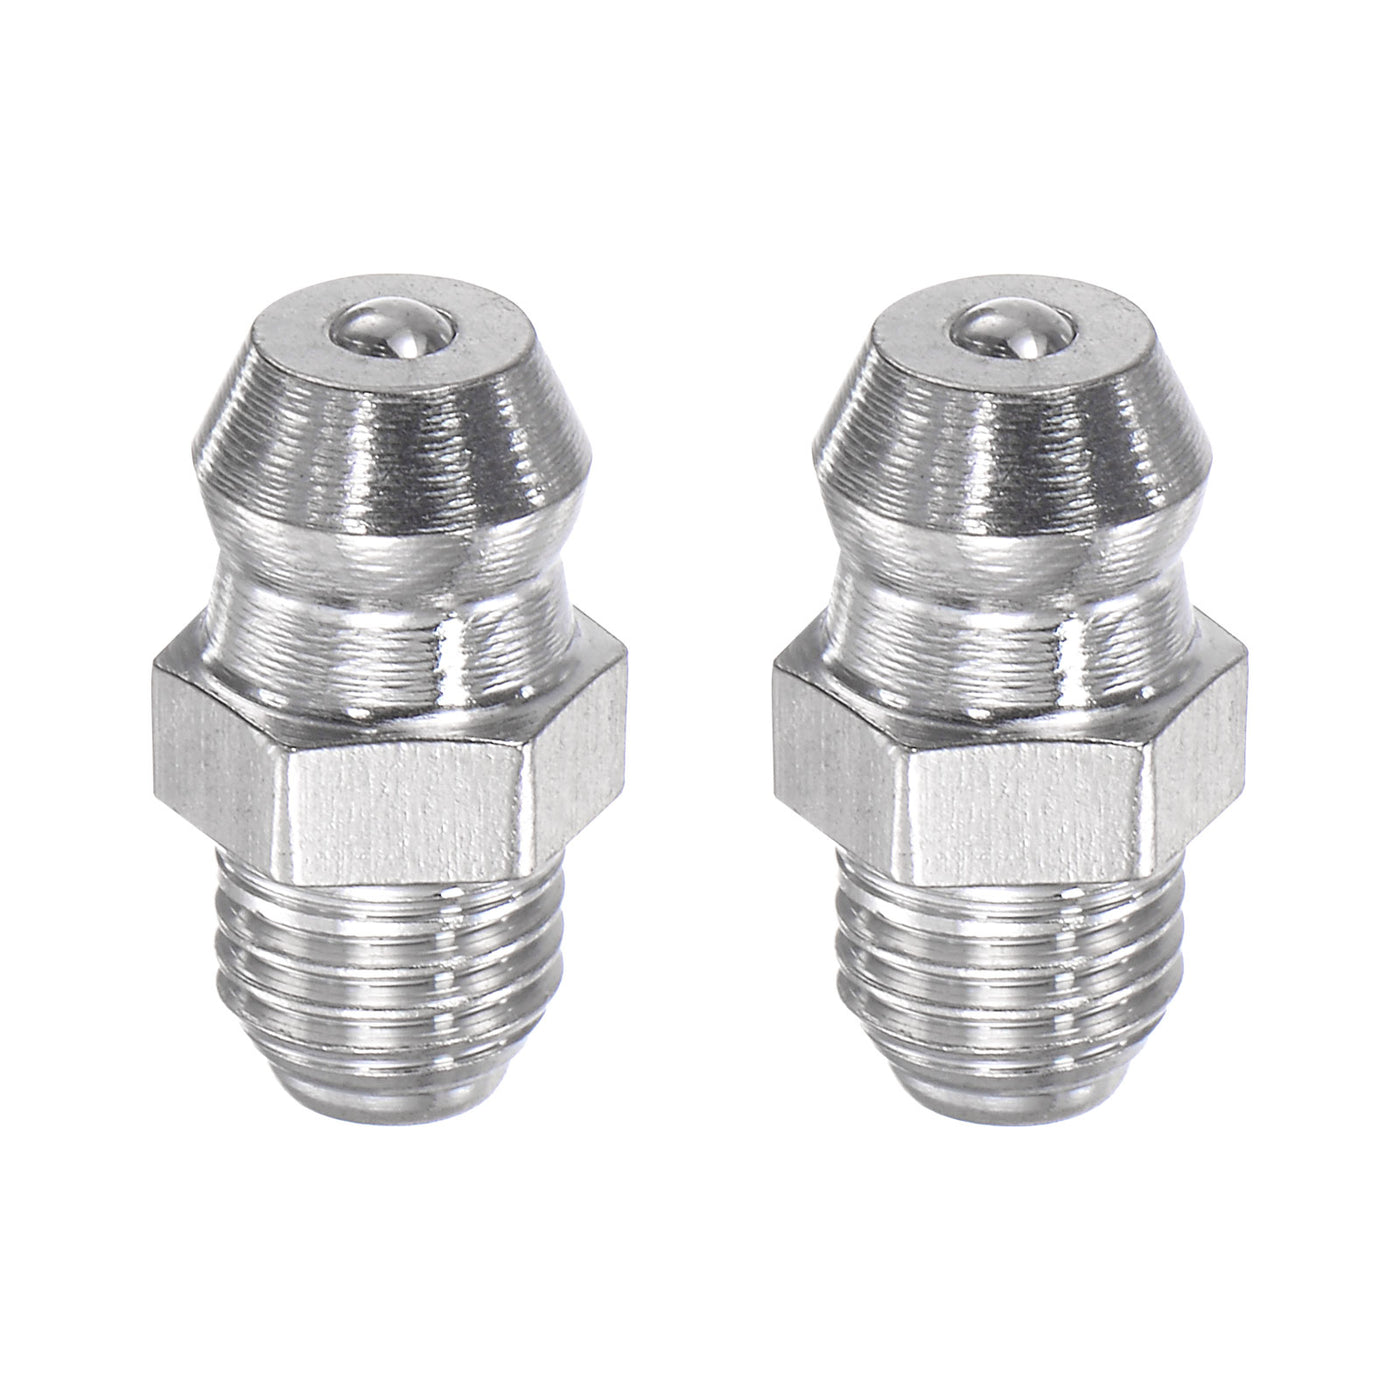 uxcell Uxcell 2Pcs Metric Stainless Steel Straight Hydraulic Grease Fitting M6 x 0.75mm Thread